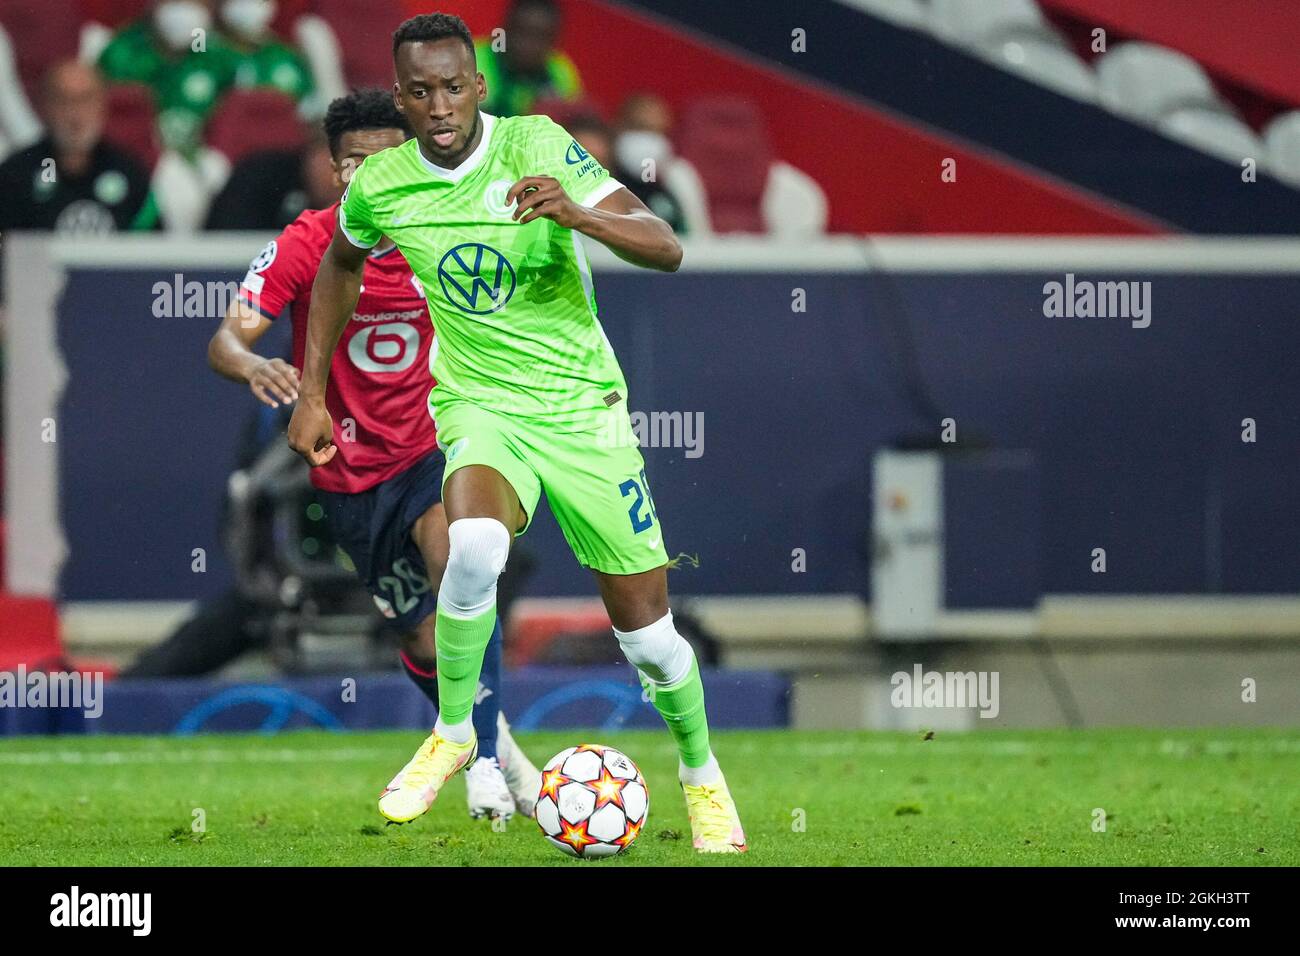 LILLE, FRANCE - SEPTEMBER 14: Dodi Lukebaklo of VfL Wolfsburg and Angel Gomes of LOSC Lille during the UEFA Champions League match between LOSC Lille and VfL Wolfsburg at Stade Pierre-Mauroy on